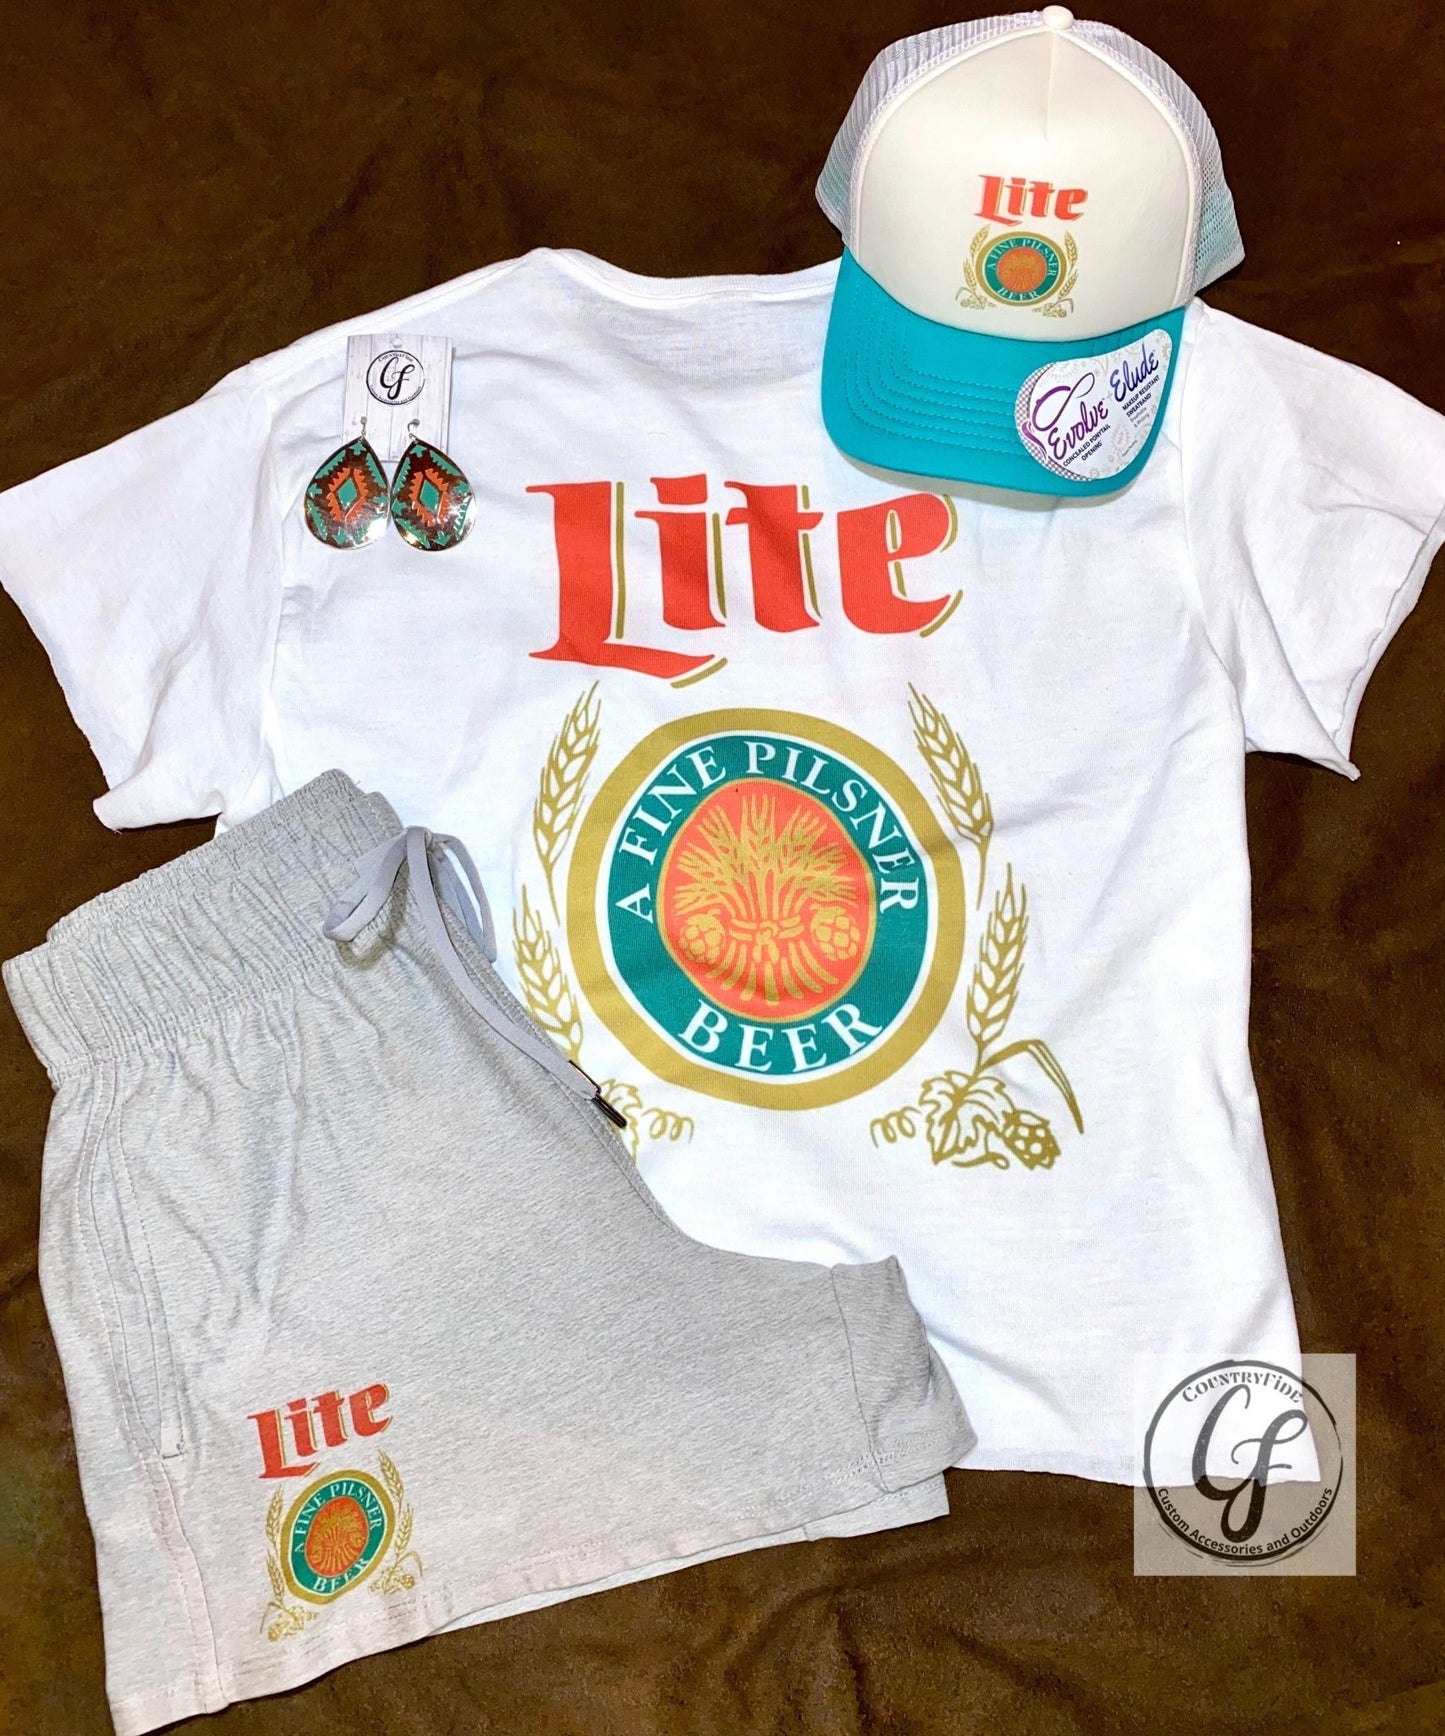 LITE GIRL - CountryFide Custom Accessories and Outdoors